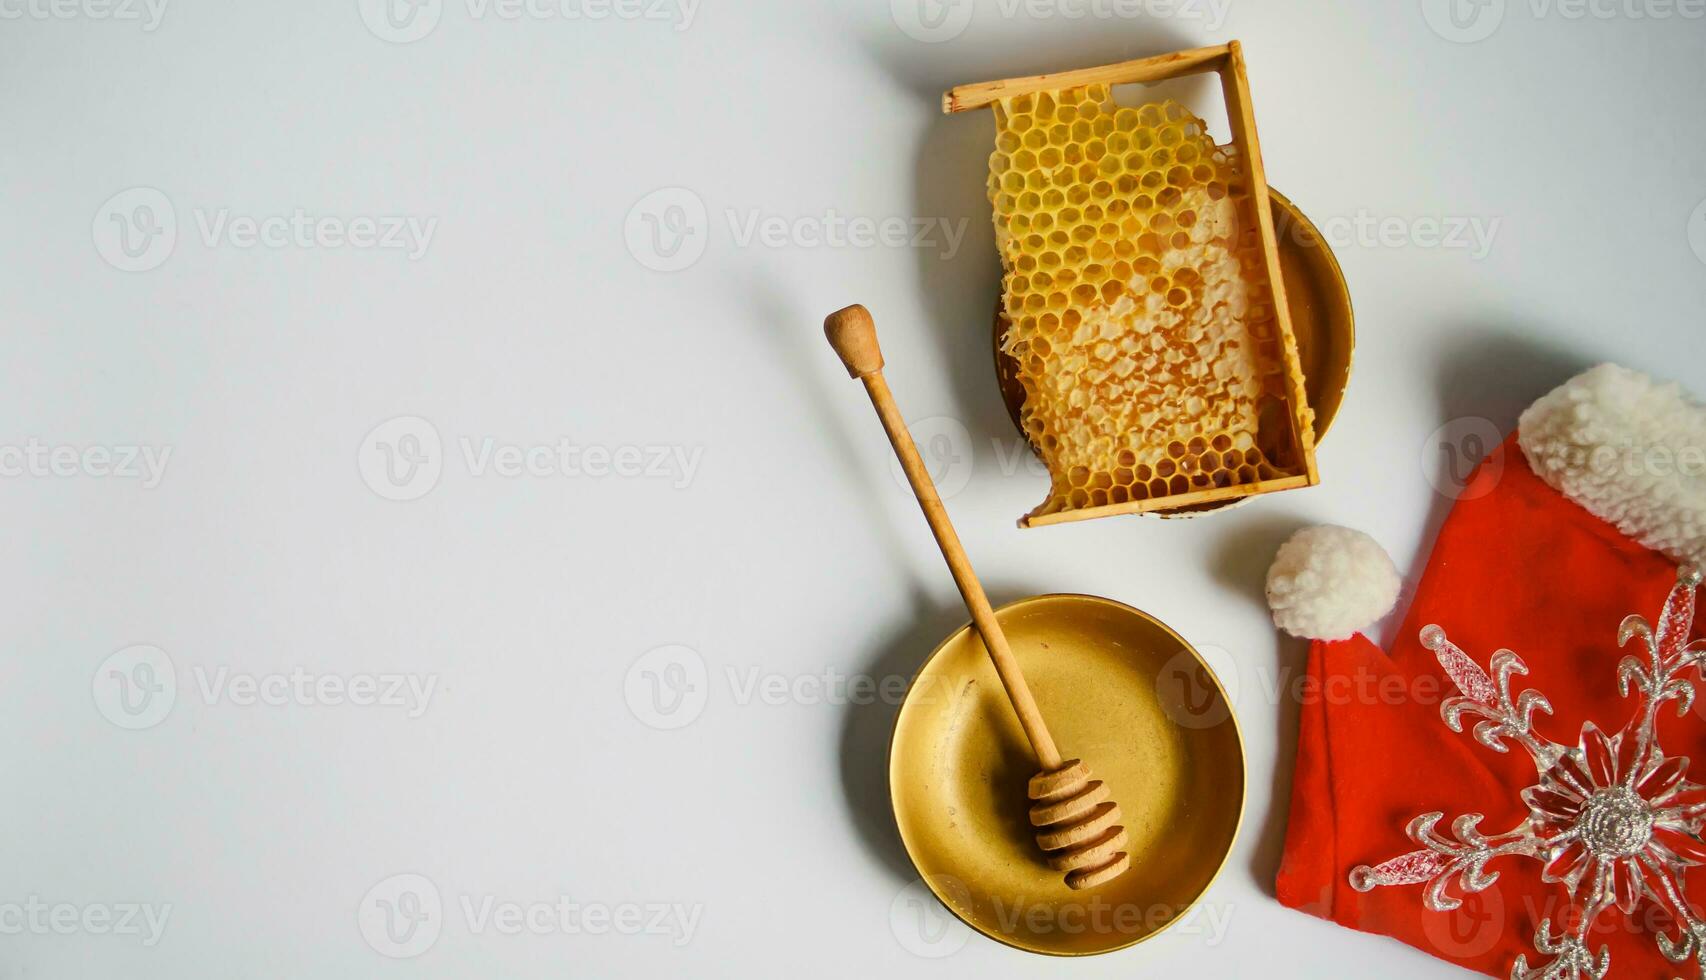 broken yellow honeycomb with honey near alarm clock on table. Honey products. healthy natural food concept. christmas and new year background for beekeeping photo